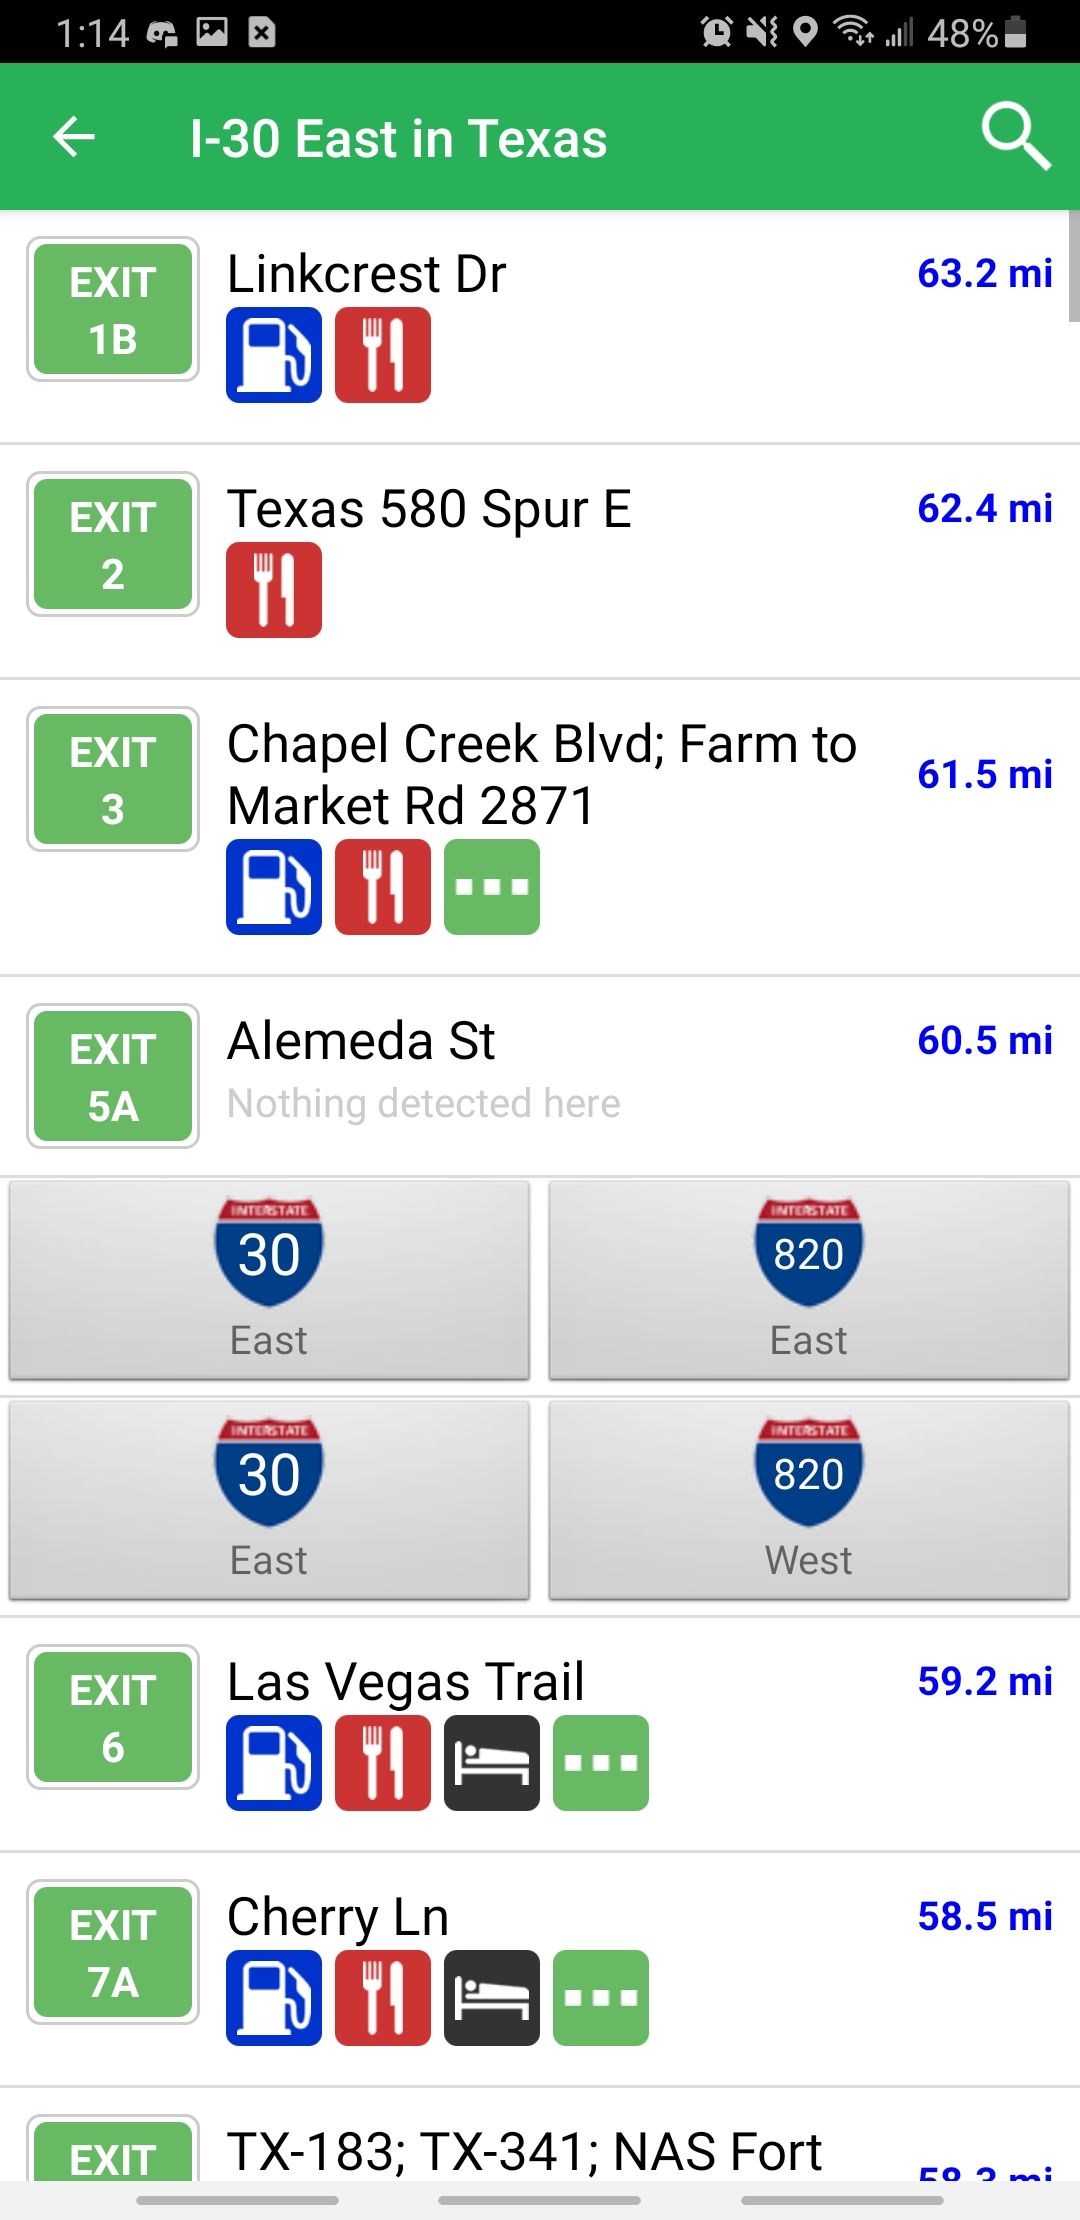 iexit app showing gas stations, food, hotels, and more at each exit on i-30